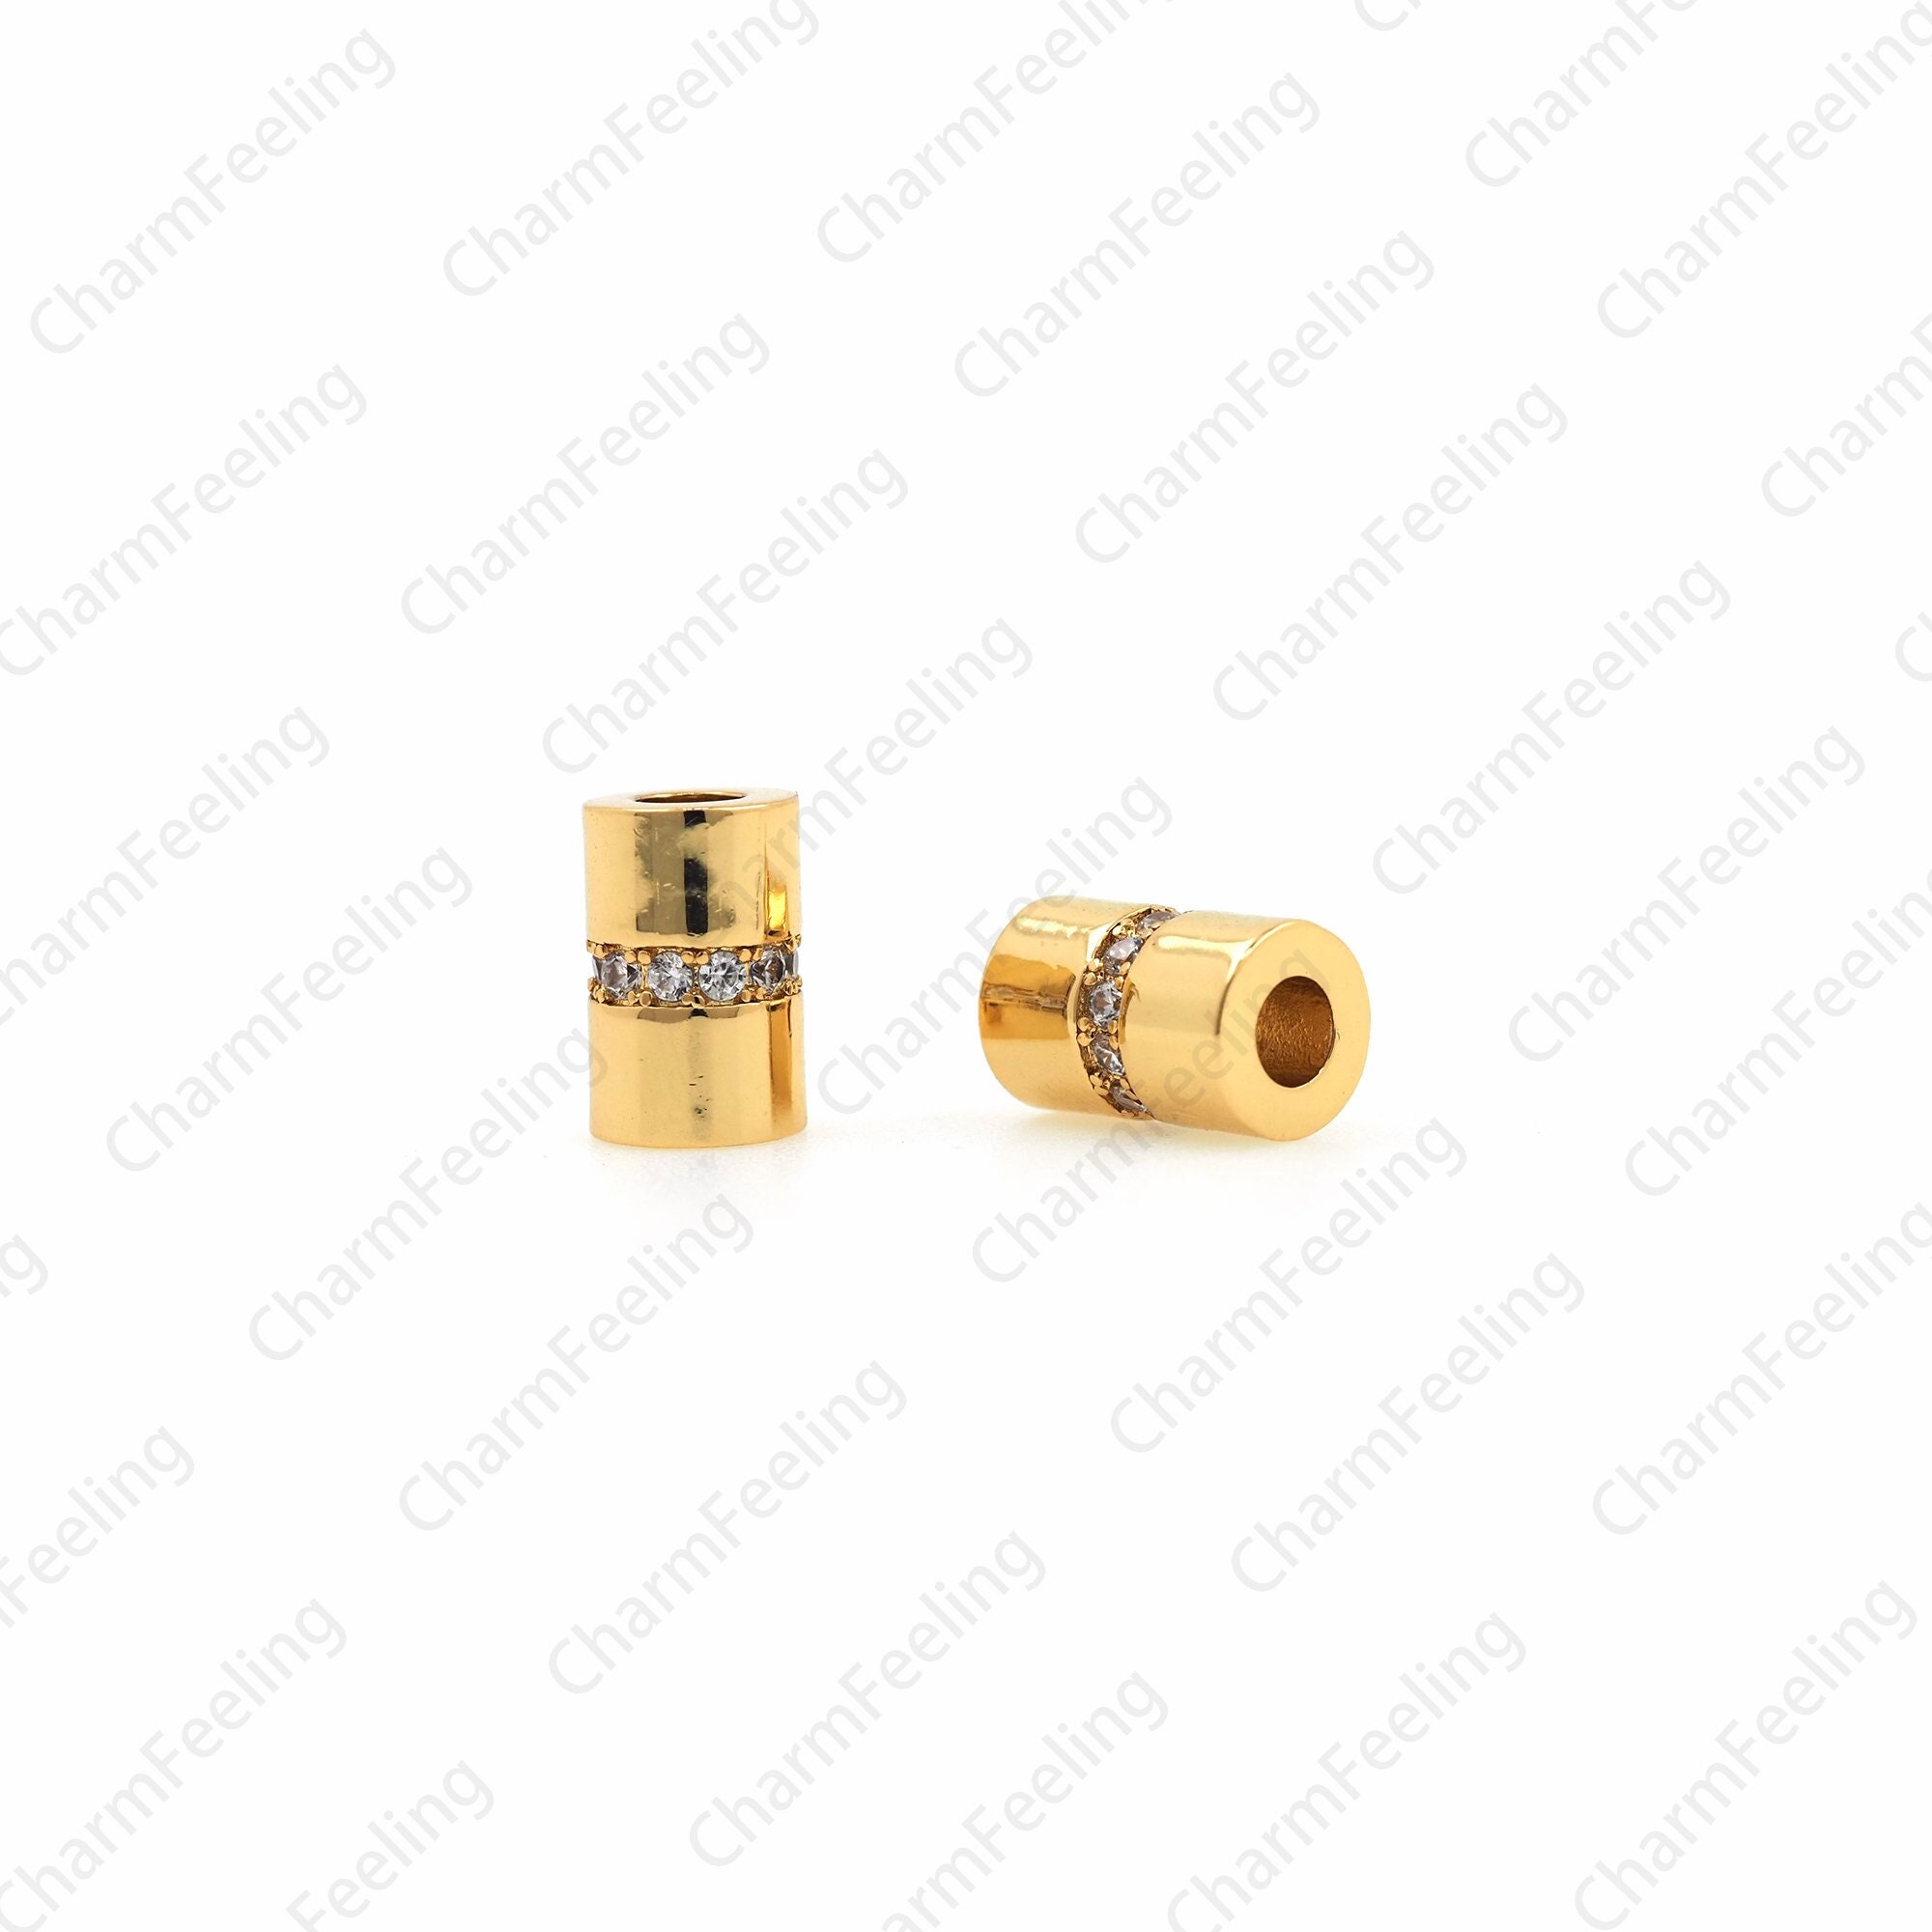 Micropav Cz Cylindrical Enamel Beads, Wholesale Bracelet Components, 18K Gold Filled Connection 10.5x6.7x6.7mm, Hole3.7mm